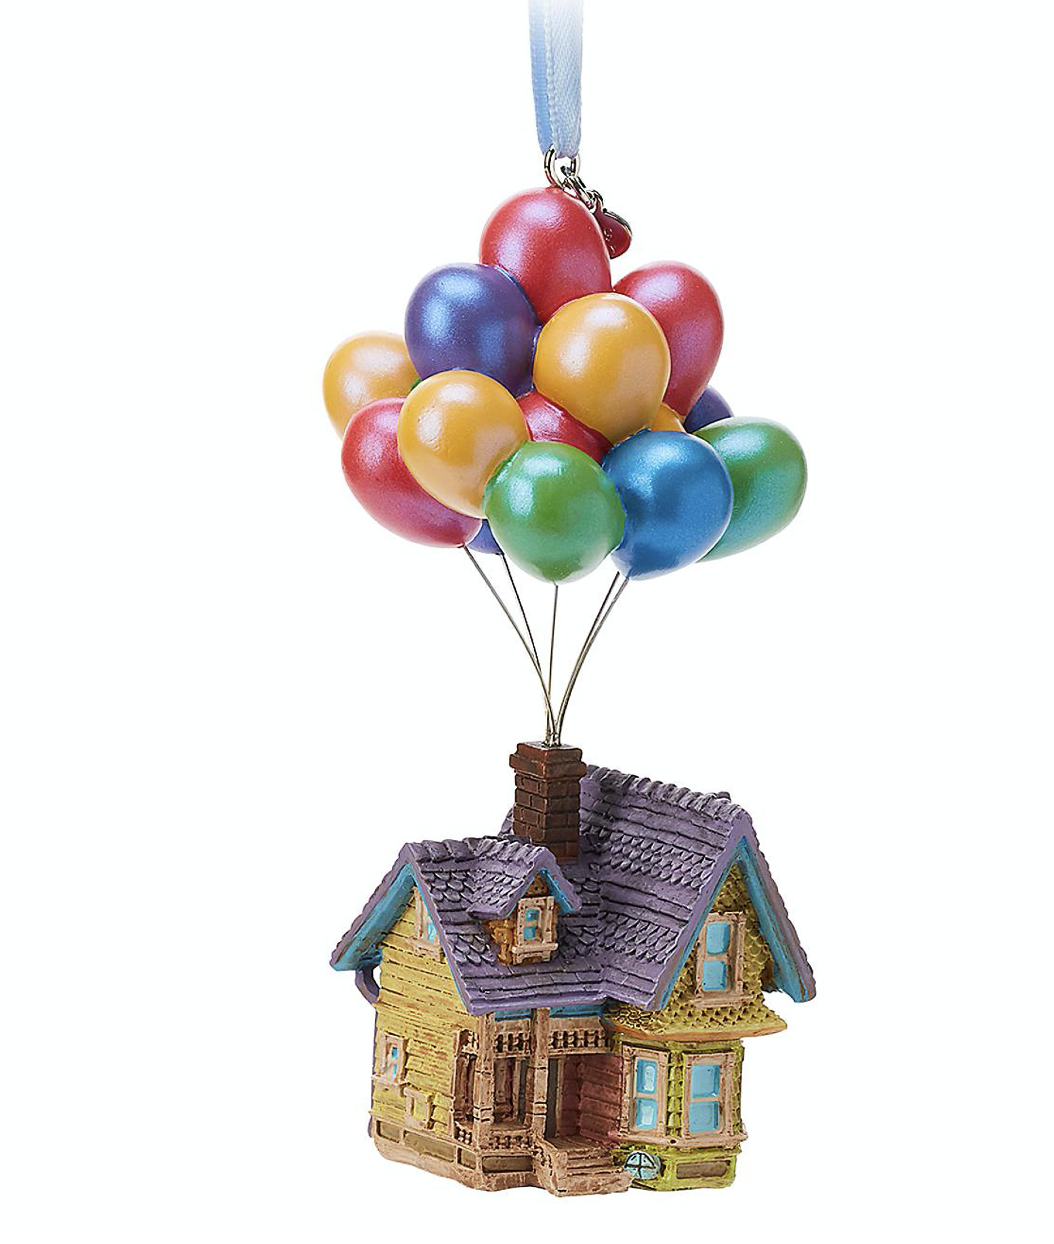 Christmas DISNEY SKETCHBOOK ORNAMENT 2020 NEW Pixar UP HOUSE with BALLOONS 